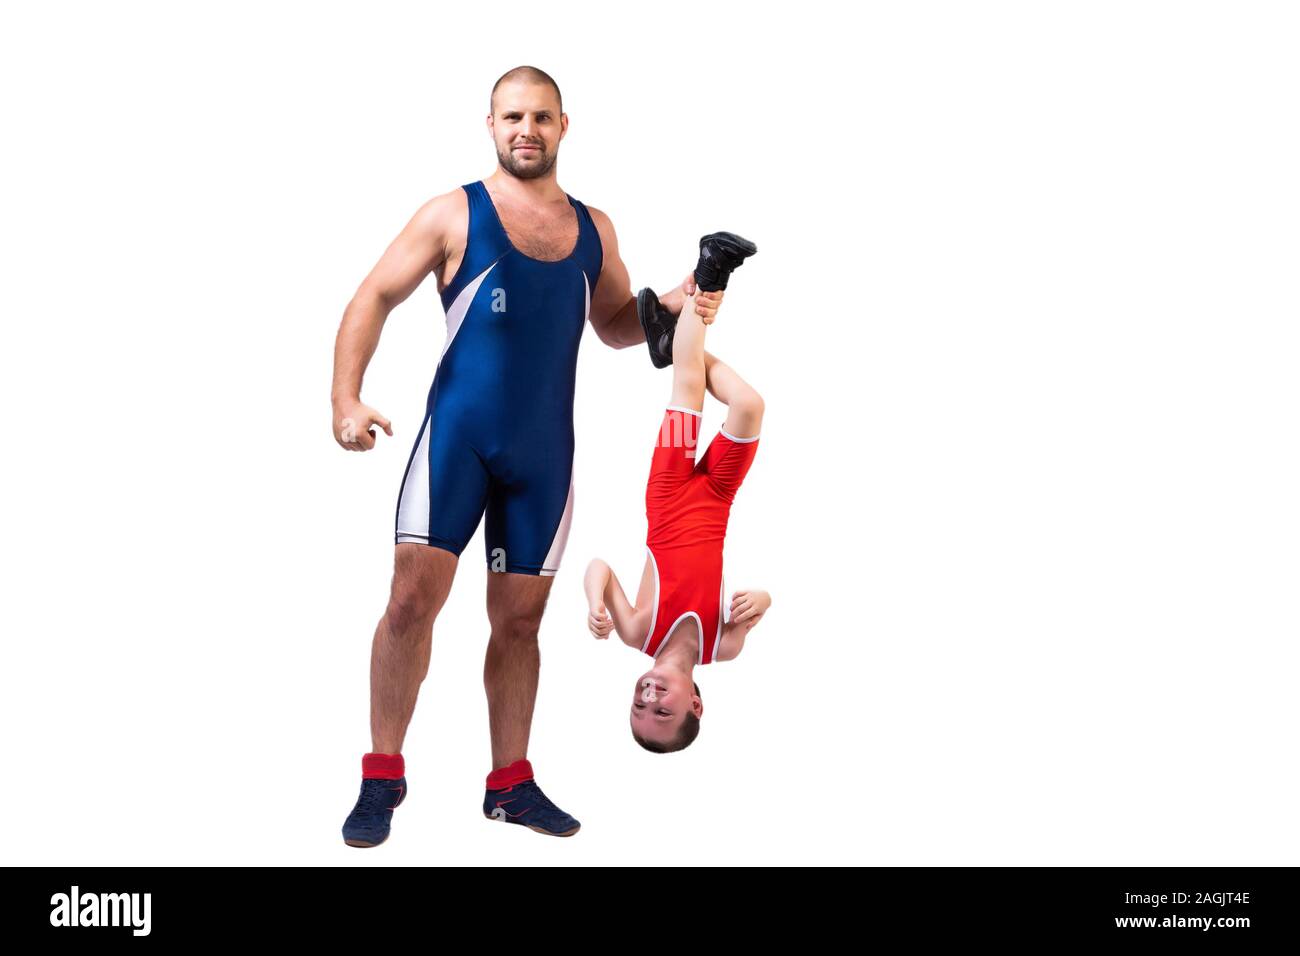 Men in wrestling tights and wrestlers holds the foot of a wrestler